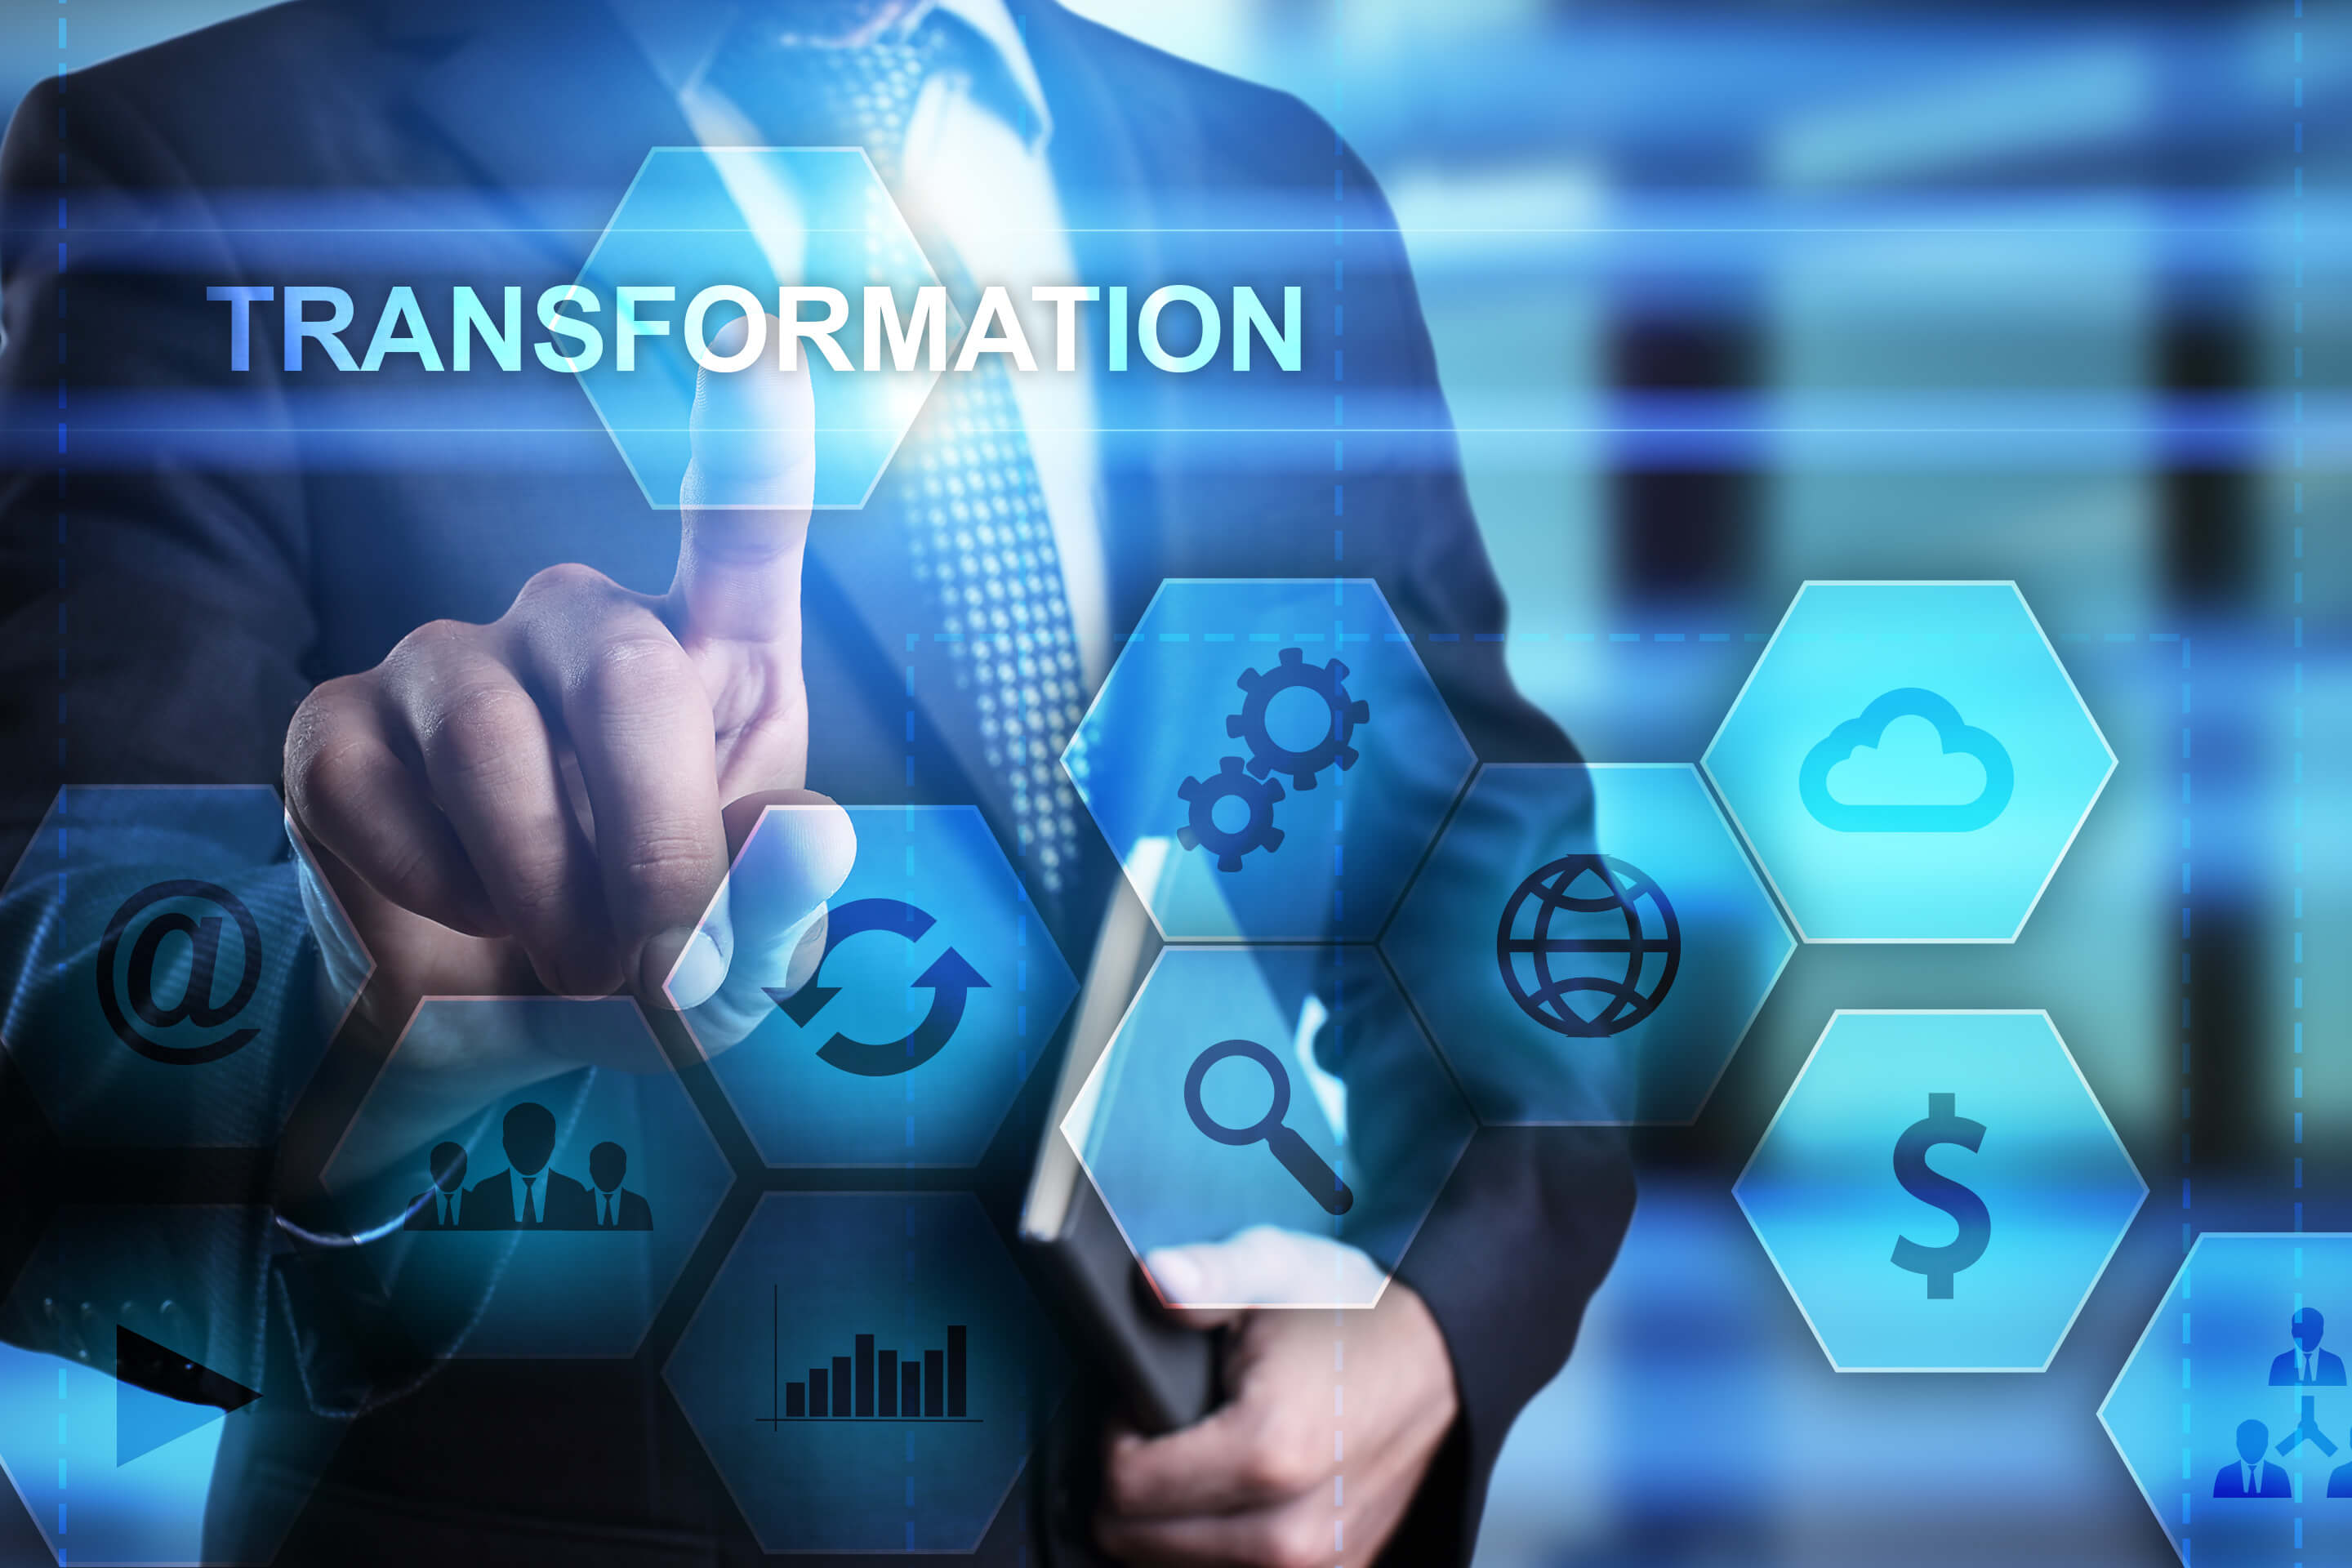 The Strategic Roles of IT in IoT and Digital Transformation